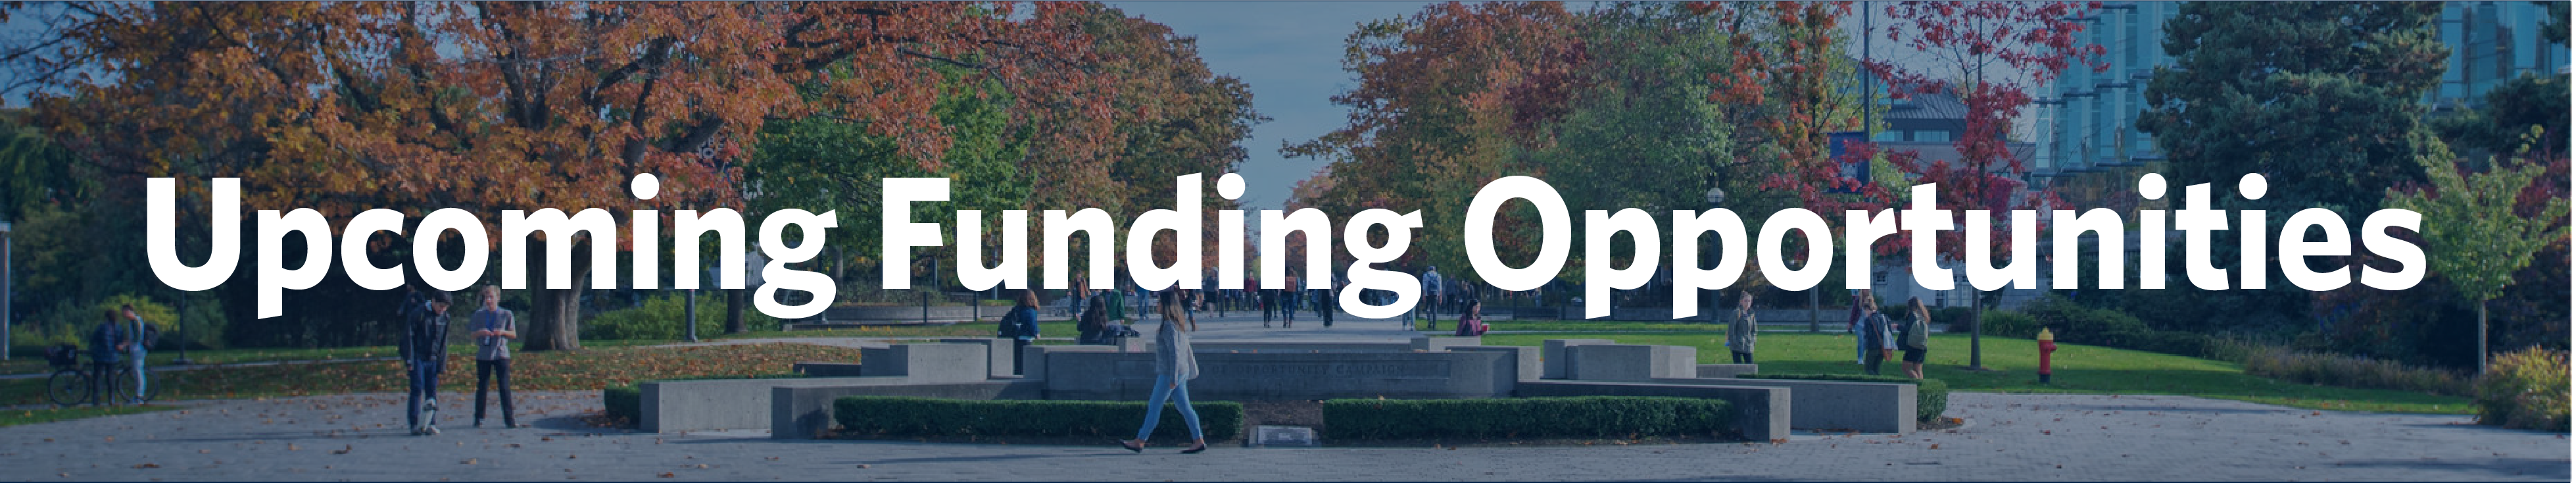 Upcoming Funding Opportunities Text on Picture of UBC Campus in the Fall